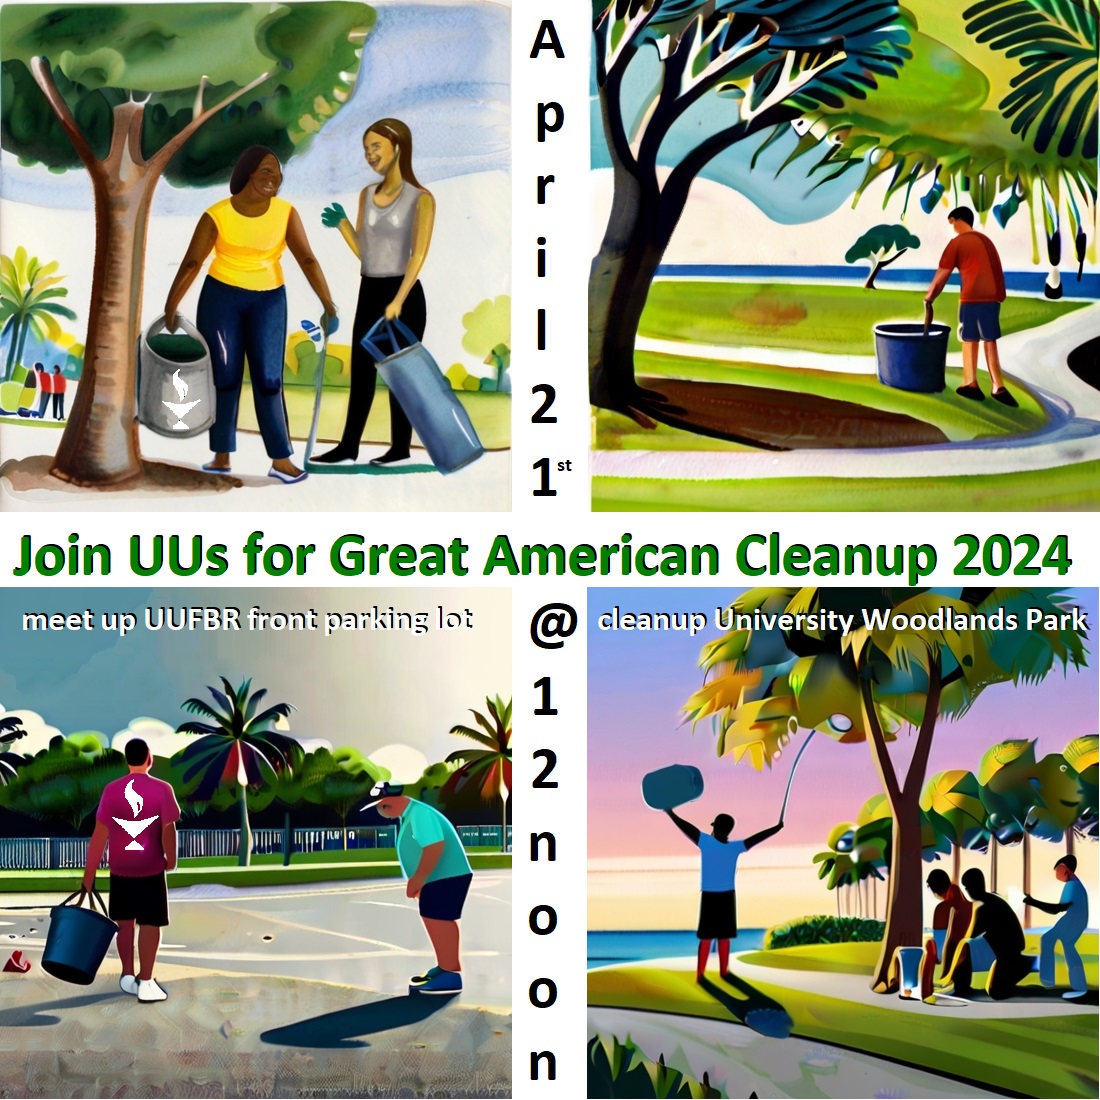 Great American Cleanup 2024 of University Woodlands Park